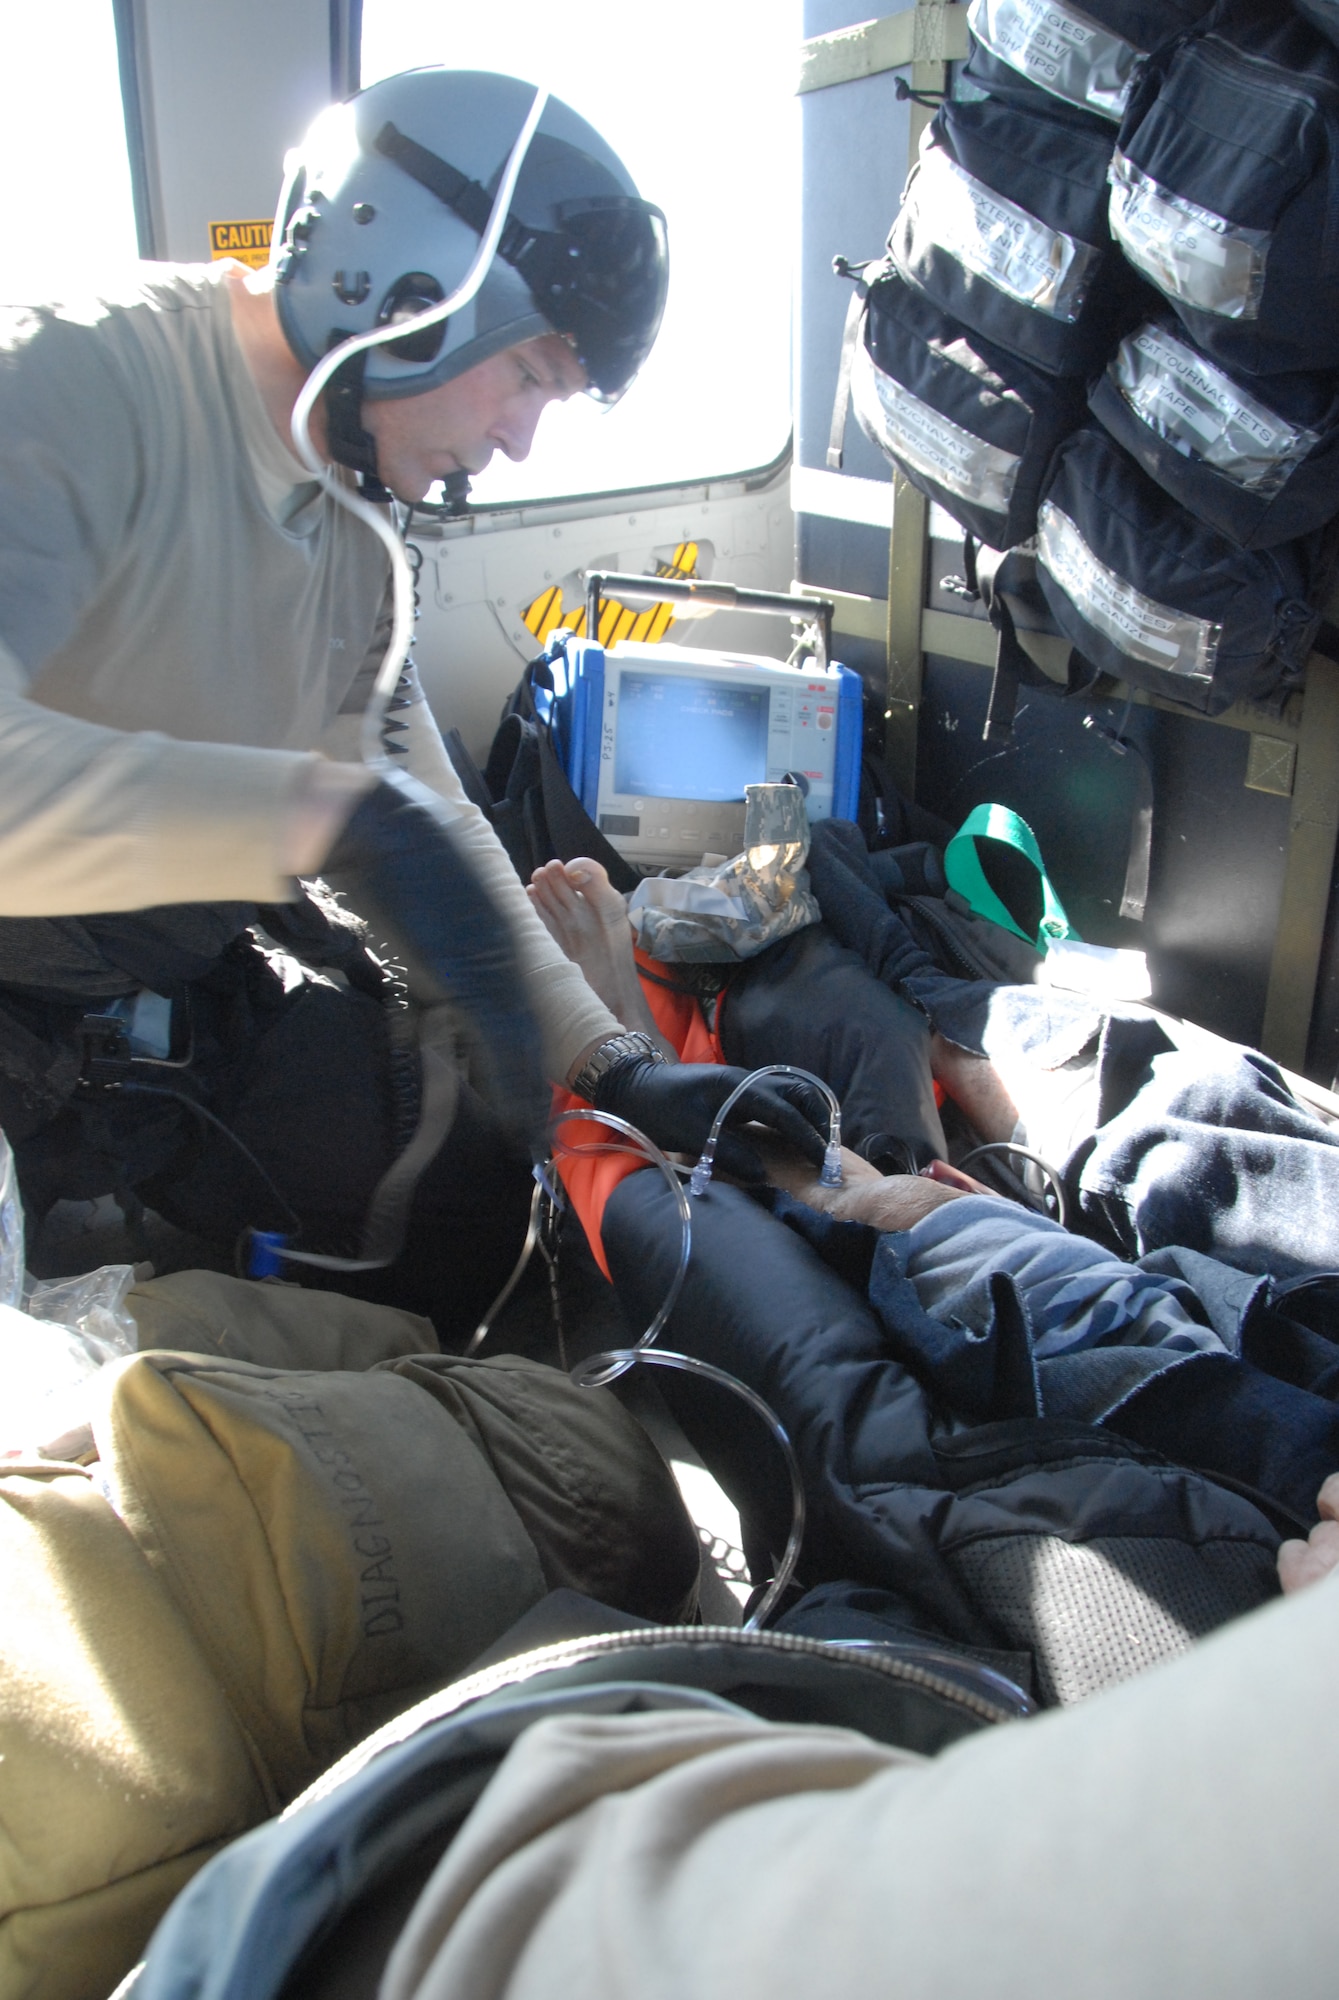 Master Sgt. Jimmy Petrolia and Staff Sgt. Adam Vanhaaster, pararescuemen assigned to the 131st Rescue Squadron, provide medical attention to a 54-year-old male patient suffering from stroke-like symptoms Feb. 4, 2012. Responding to the call from the Eleventh District Coast Guard at Alameda, pararescuers, or PJs, two HH-60G Pave Hawks and one MC-130P Combat Shadow aircraft departed Moffett Federal Airfield for the MSC Beijing, acargo ship more than 200 miles off the coast of California. Guardsmen air lifted the patient to the San Jose Regional Medical Center. (Air National Guard photo by Senior Airman Jessica Green)